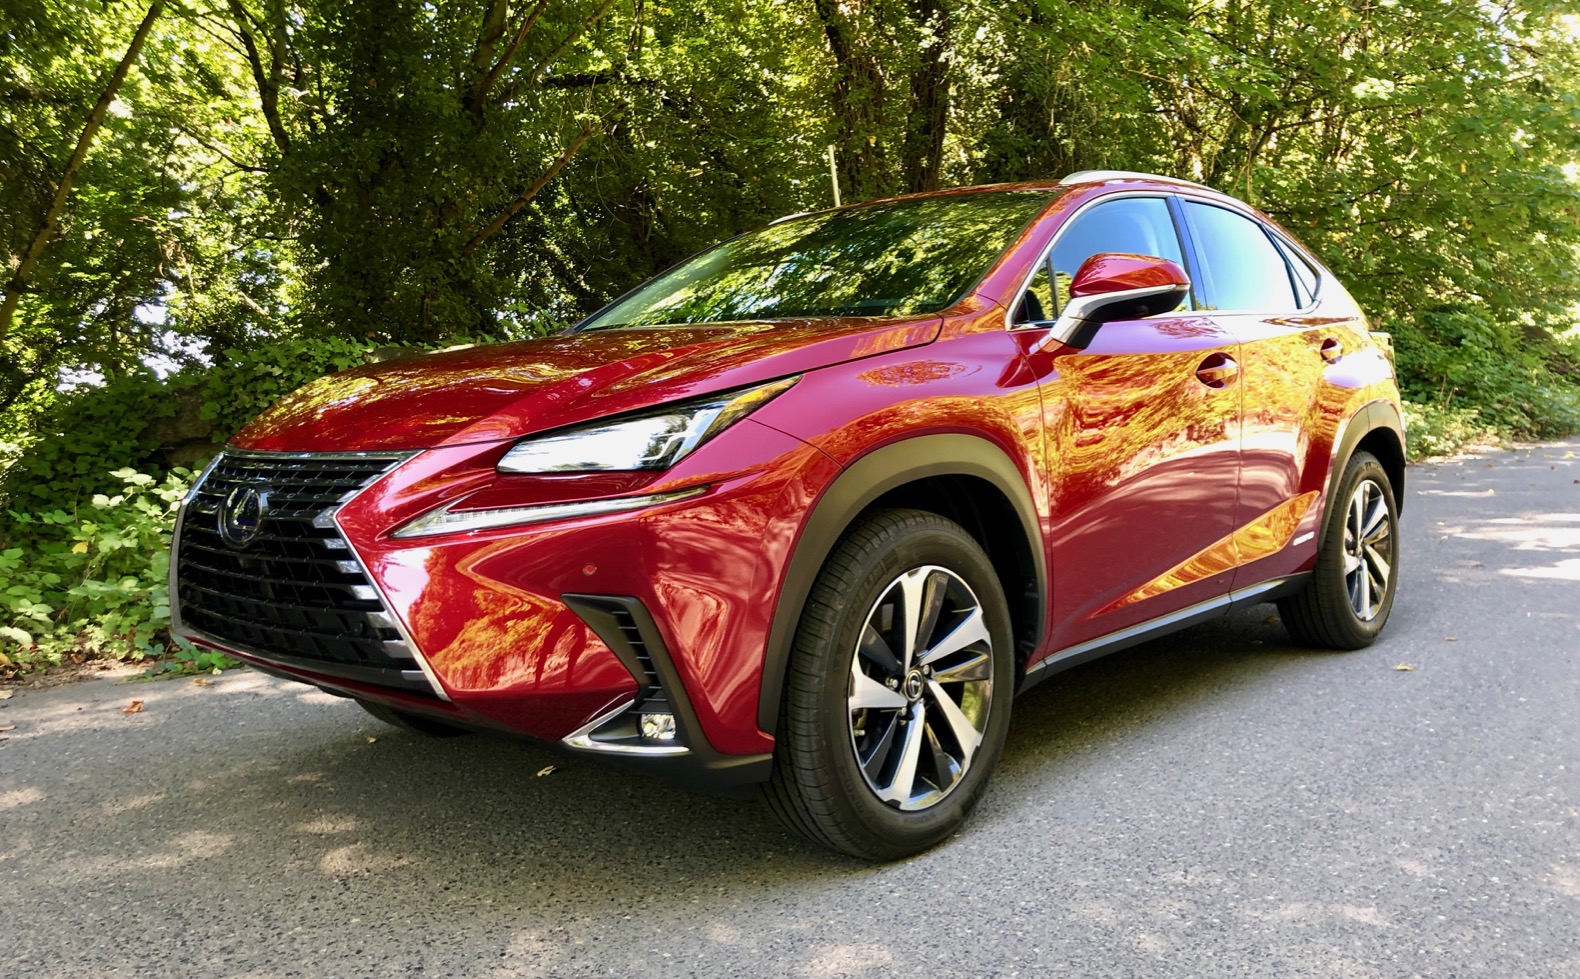 2020 Lexus NX 300h Review: A fuel efficient luxury crossover - The Torque  Report